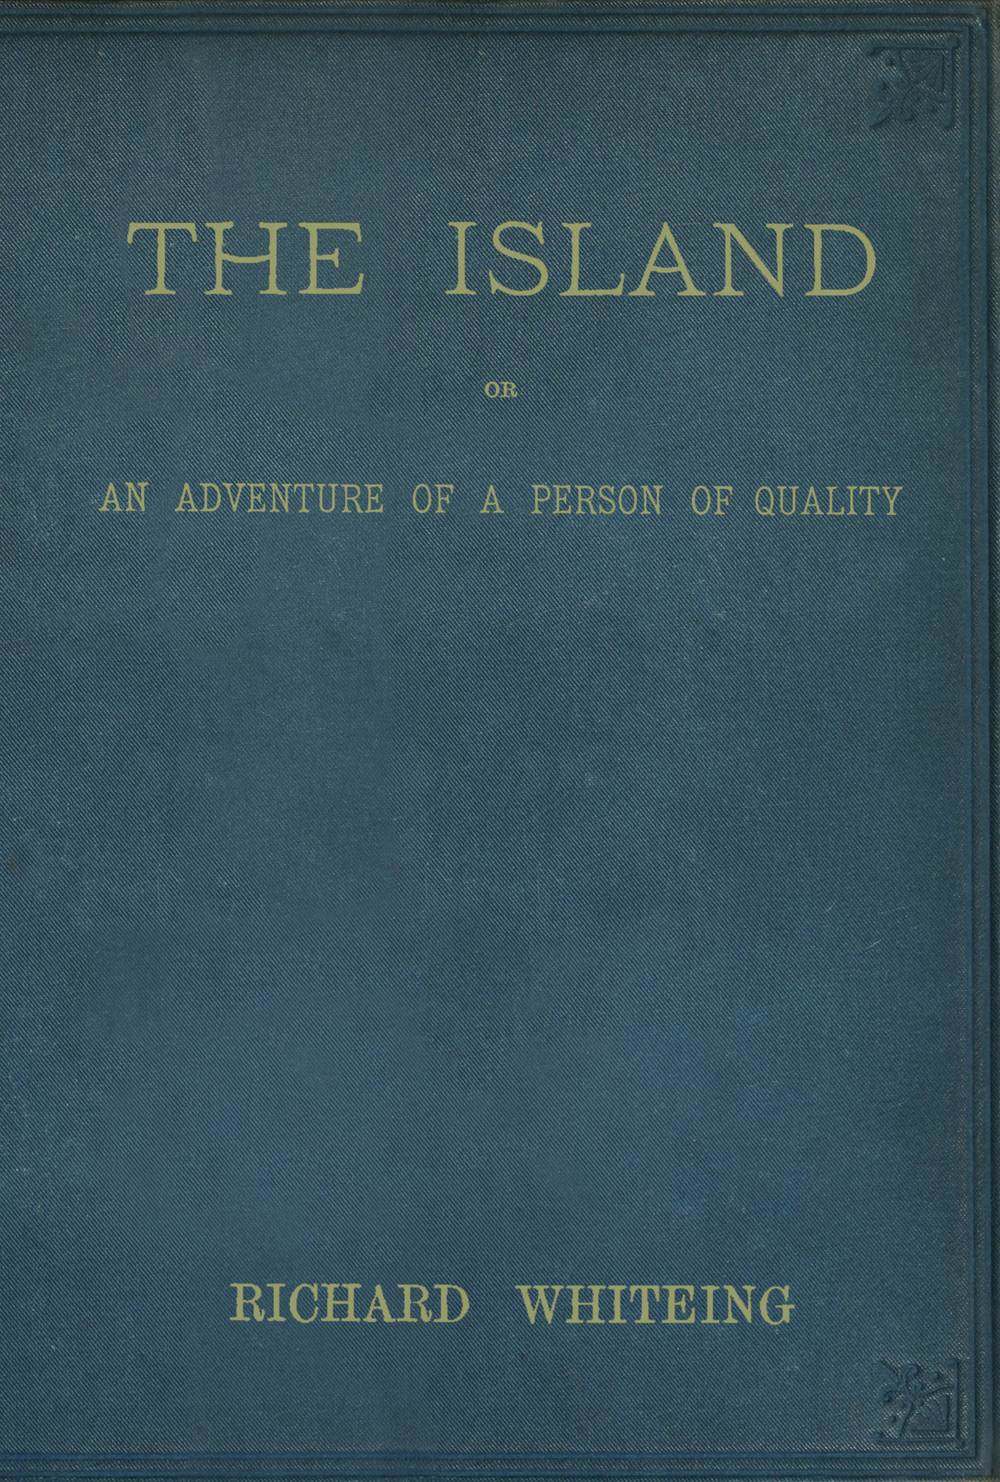 Front cover: The Island or An Adventure of a Person of Quality - Richard Whiteing